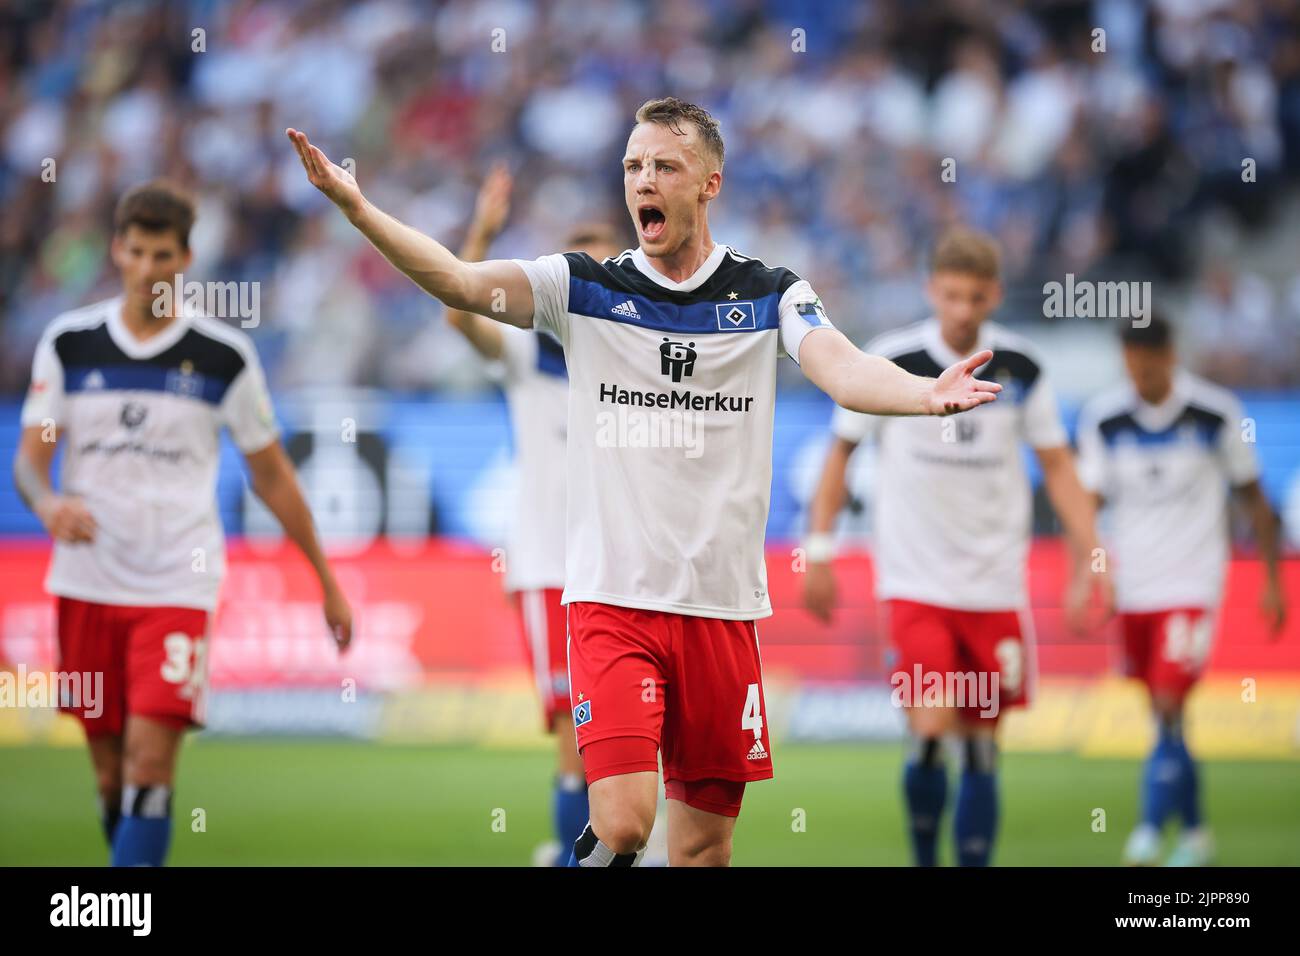 Hamburg, Germany. 19th Aug, 2022. Soccer: 2nd Bundesliga, Matchday 5, Hamburger SV - Darmstadt 98 at Volksparkstadion. Hamburg's Sebastian Schonlau gestures on the pitch. Credit: Christian Charisius/dpa - IMPORTANT NOTE: In accordance with the requirements of the DFL Deutsche Fußball Liga and the DFB Deutscher Fußball-Bund, it is prohibited to use or have used photographs taken in the stadium and/or of the match in the form of sequence pictures and/or video-like photo series./dpa/Alamy Live News Stock Photo